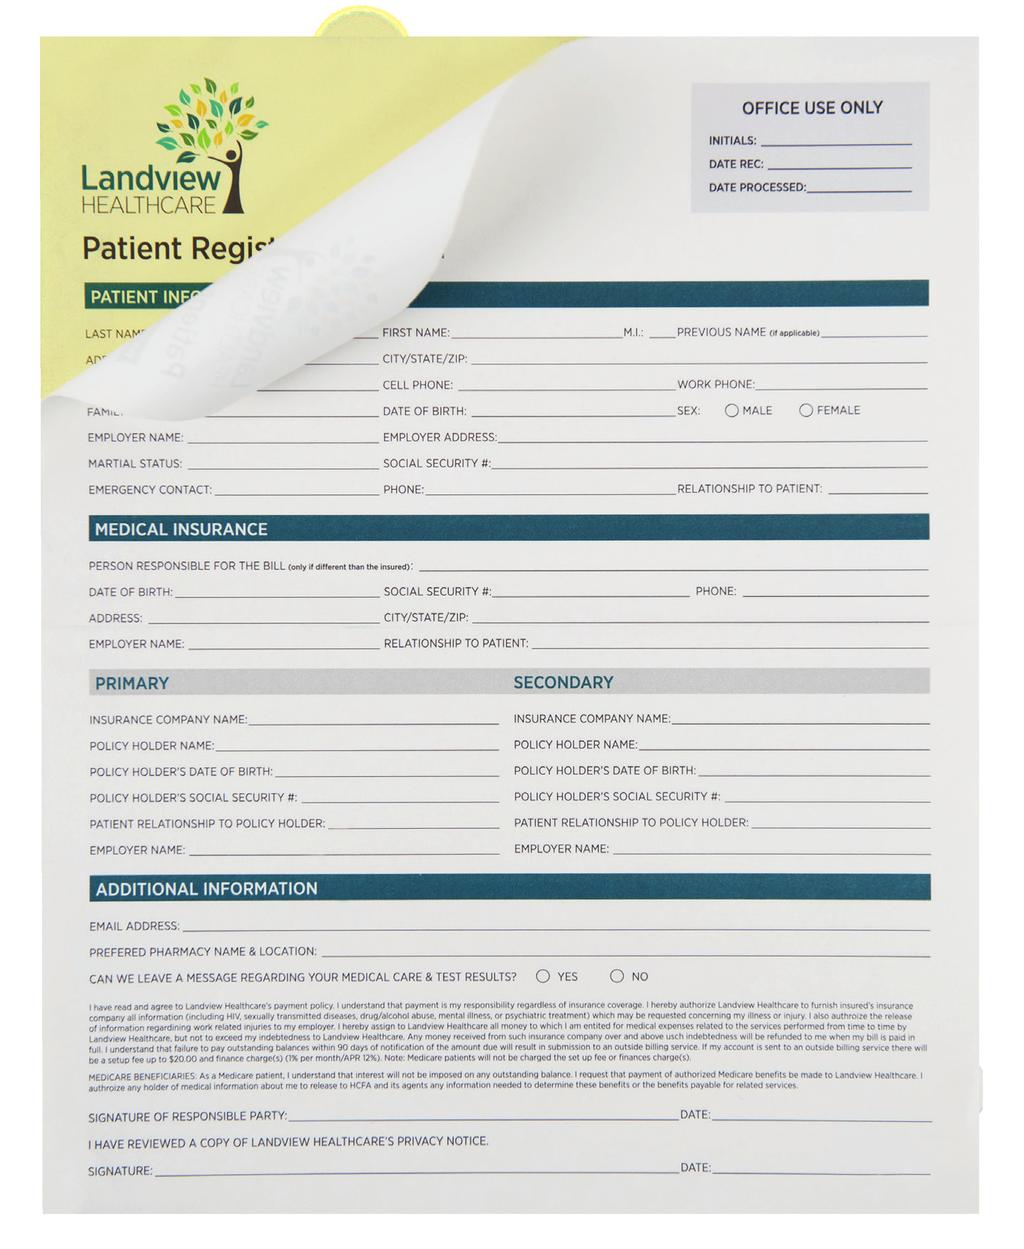 Full Color Custom Forms Did You know? Full color print on every sheet lets you bring branding to every copy of a form.